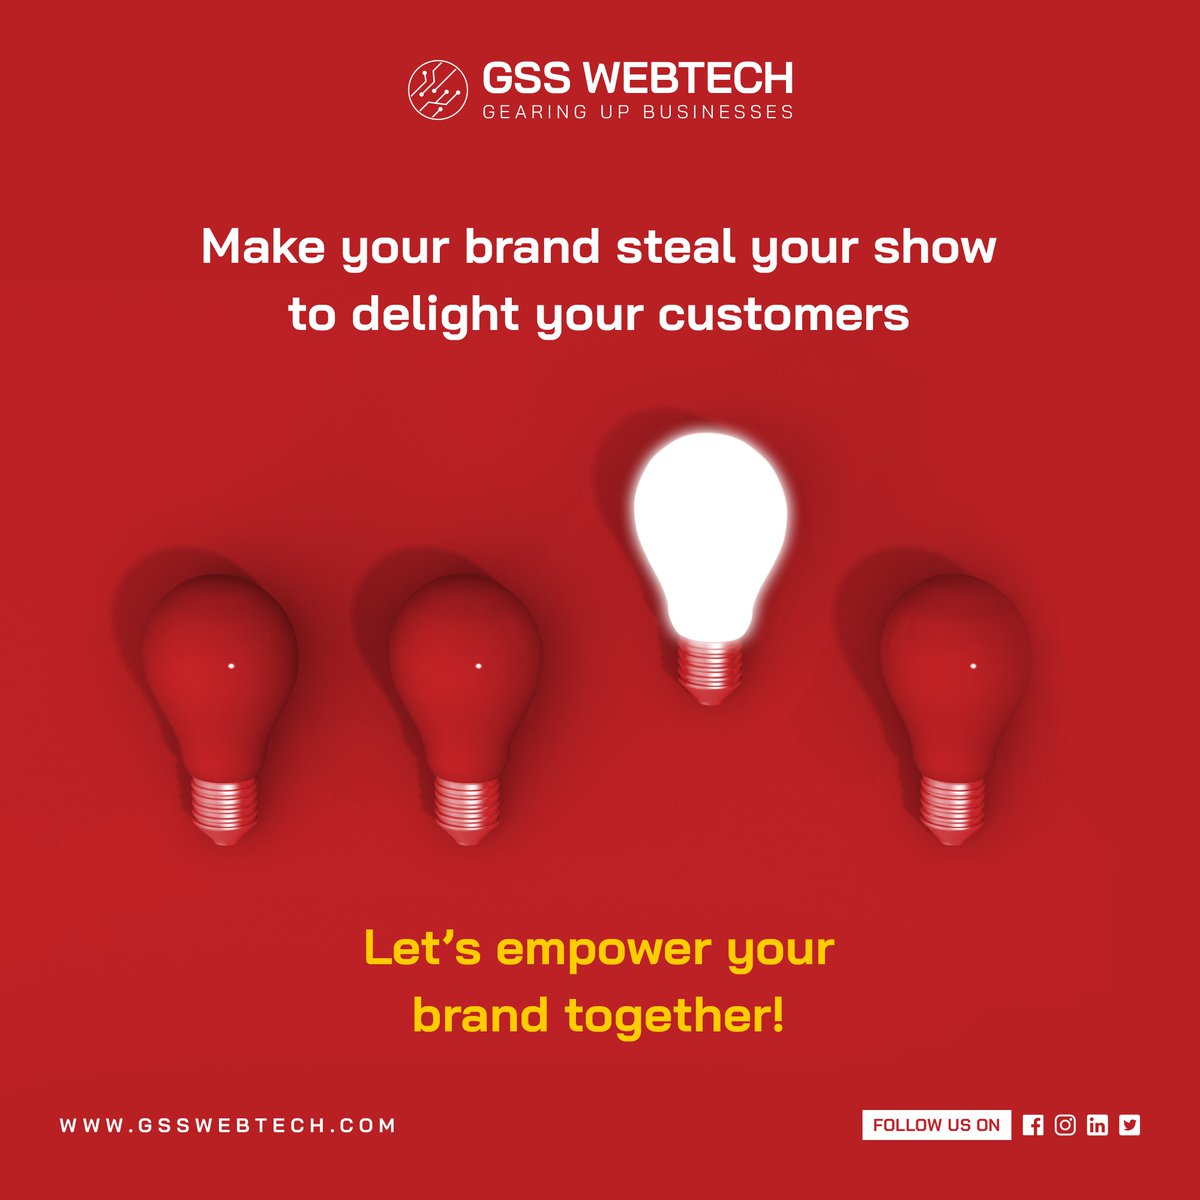 When the competition is tough, you don't back out. You stand out from the competition!

#GSSWebtech #branding #digitalmarketing #brandingagency #brandingcompany #business #marketingdigital #socialmedia #socialmediamarketing #trending #instagrammarketing #facebookmarketing